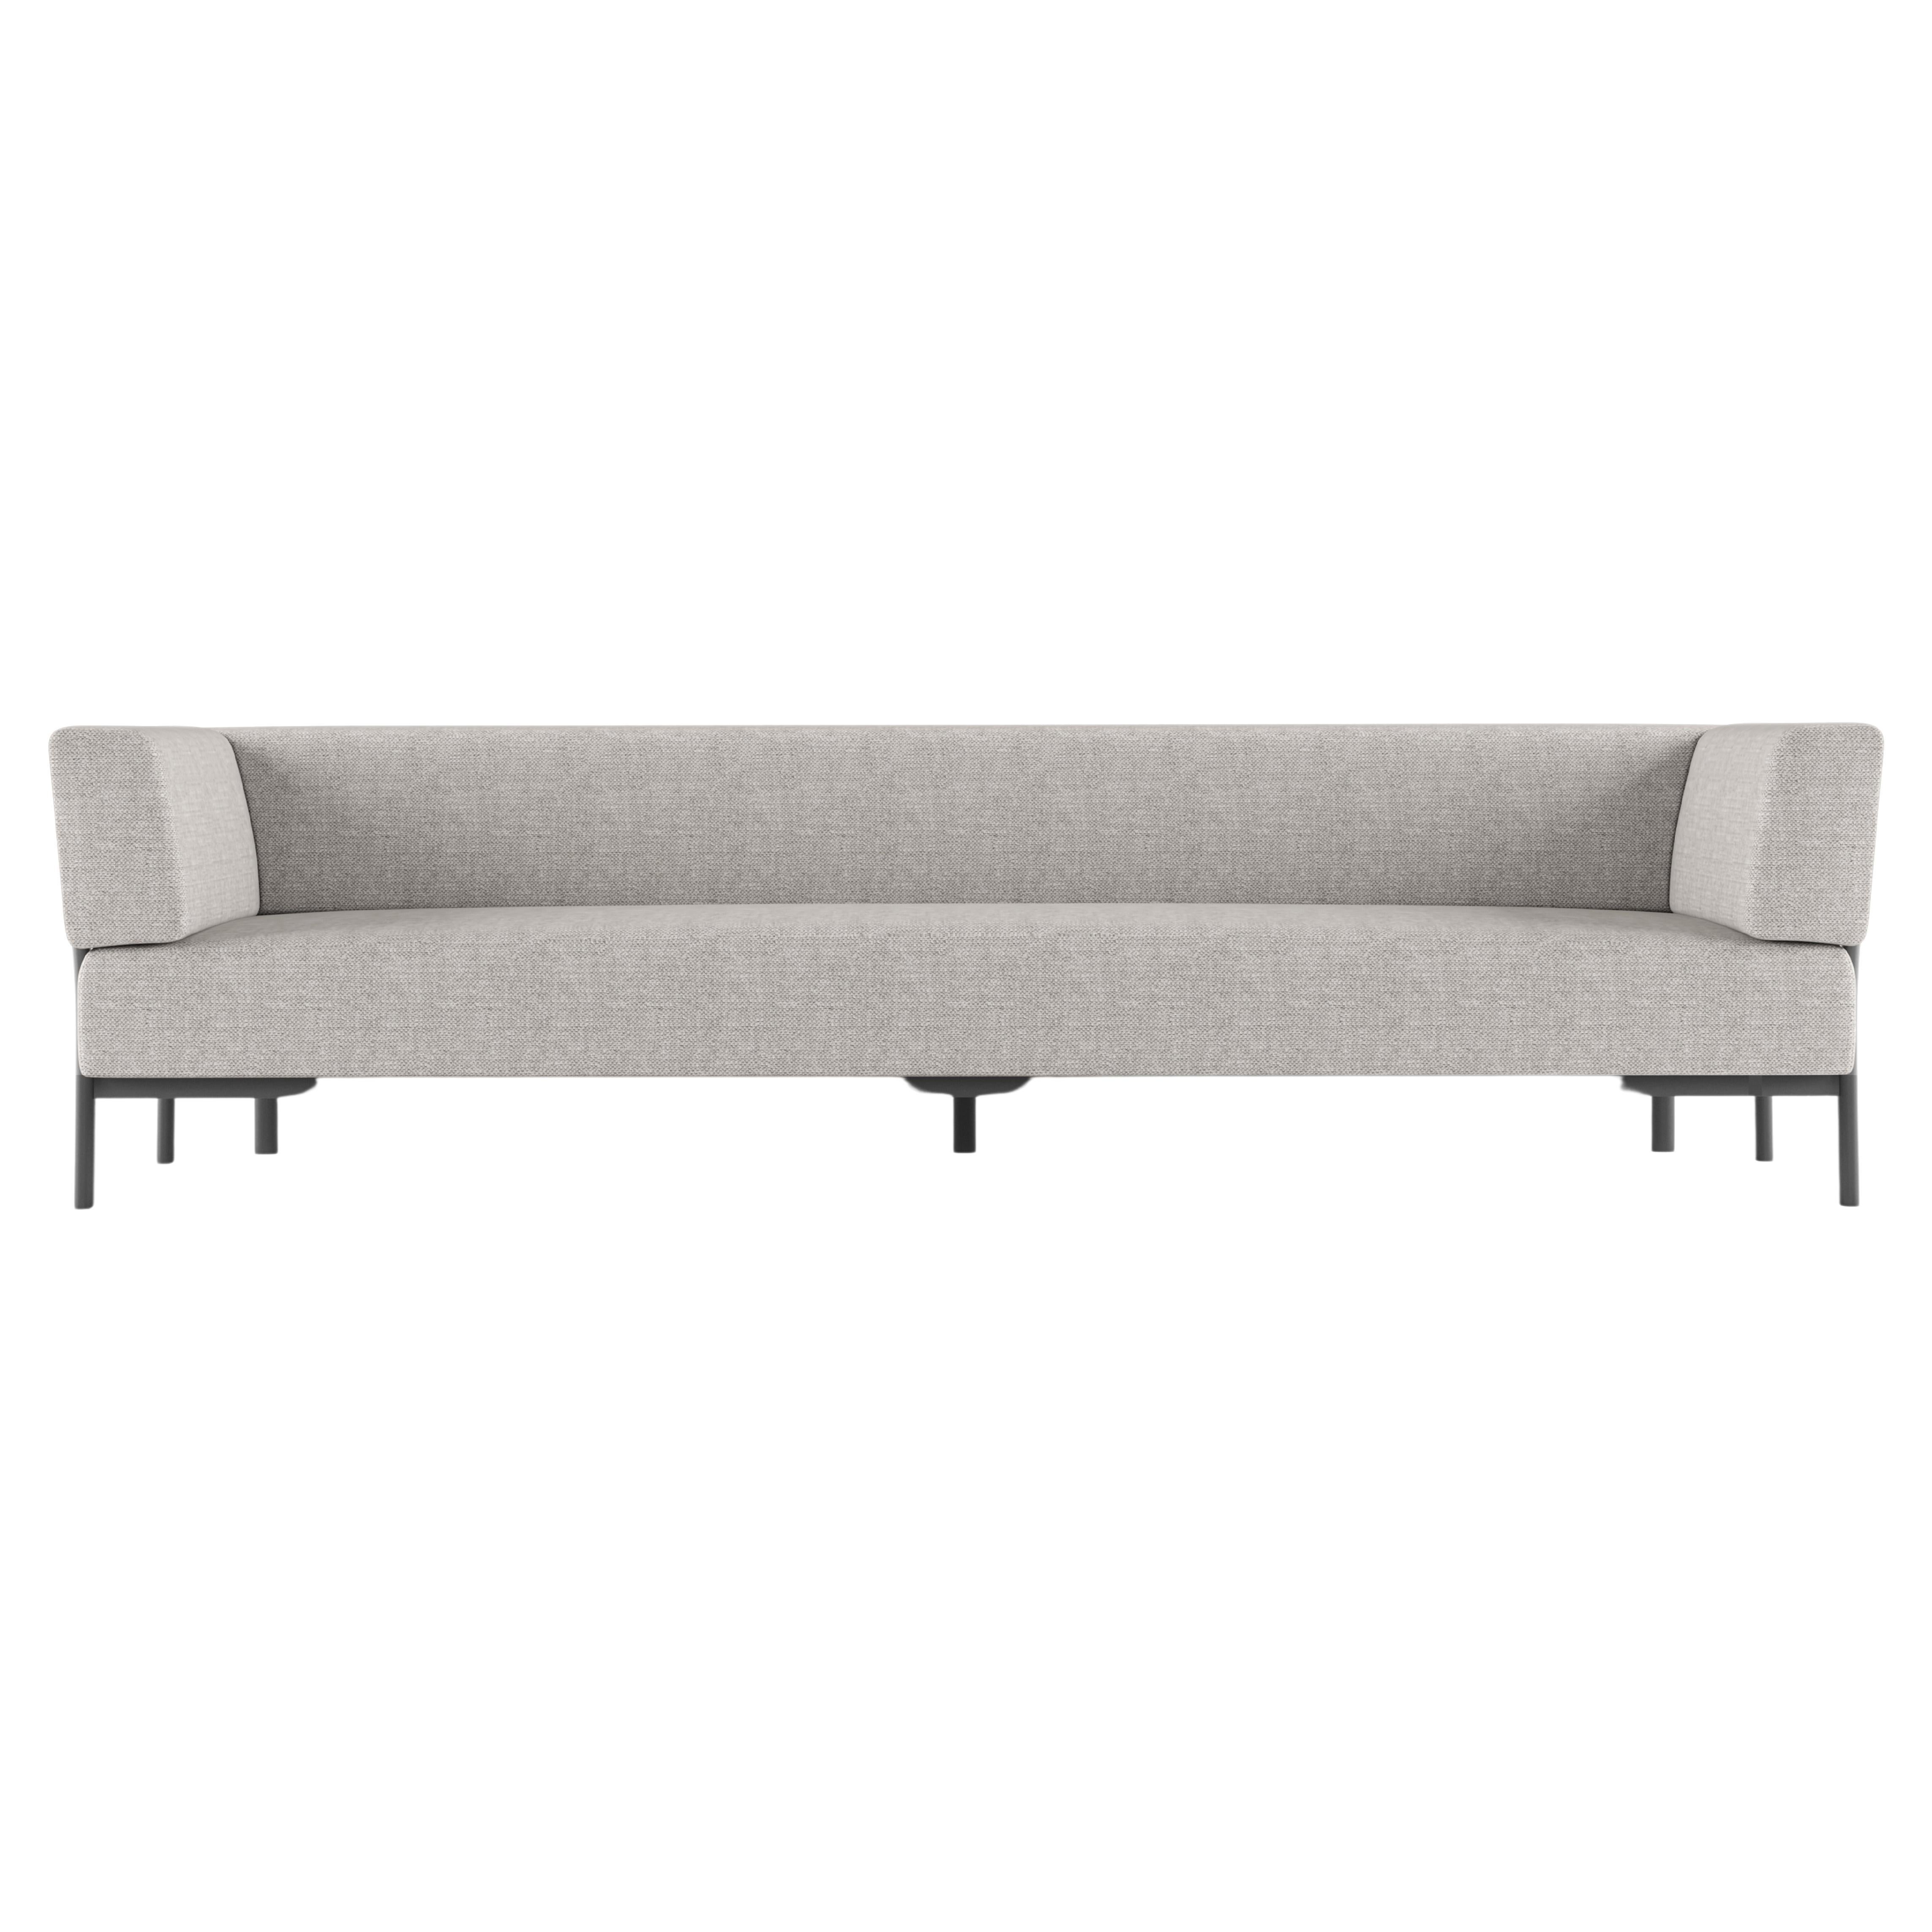 Alias T03_O Ten 3 Seater Outdoor Sofa in Grey and Black Lacquered Aluminum Frame